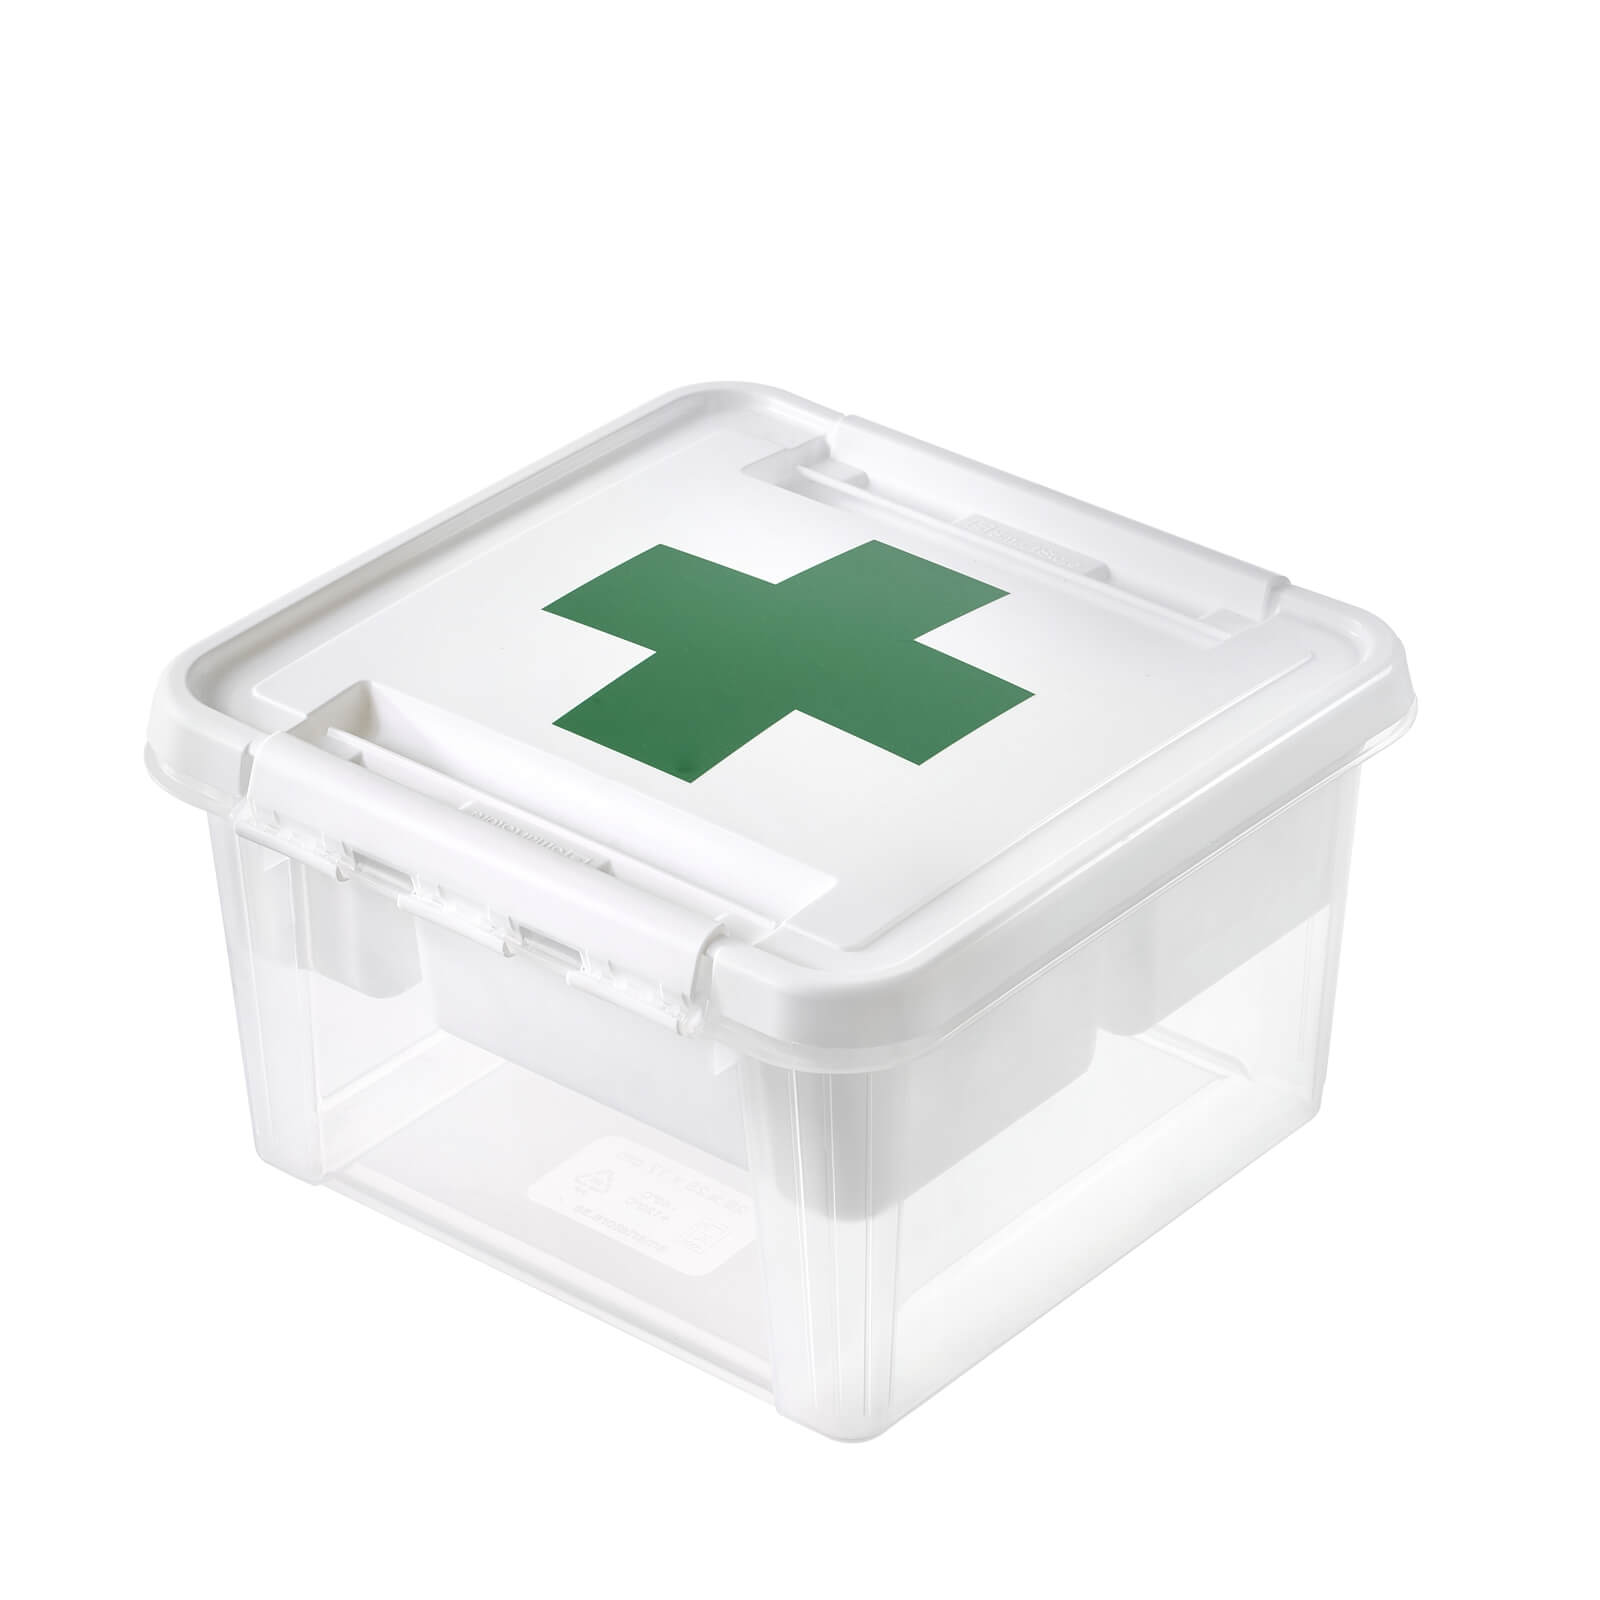 SmartStore Deco 12 First Aid